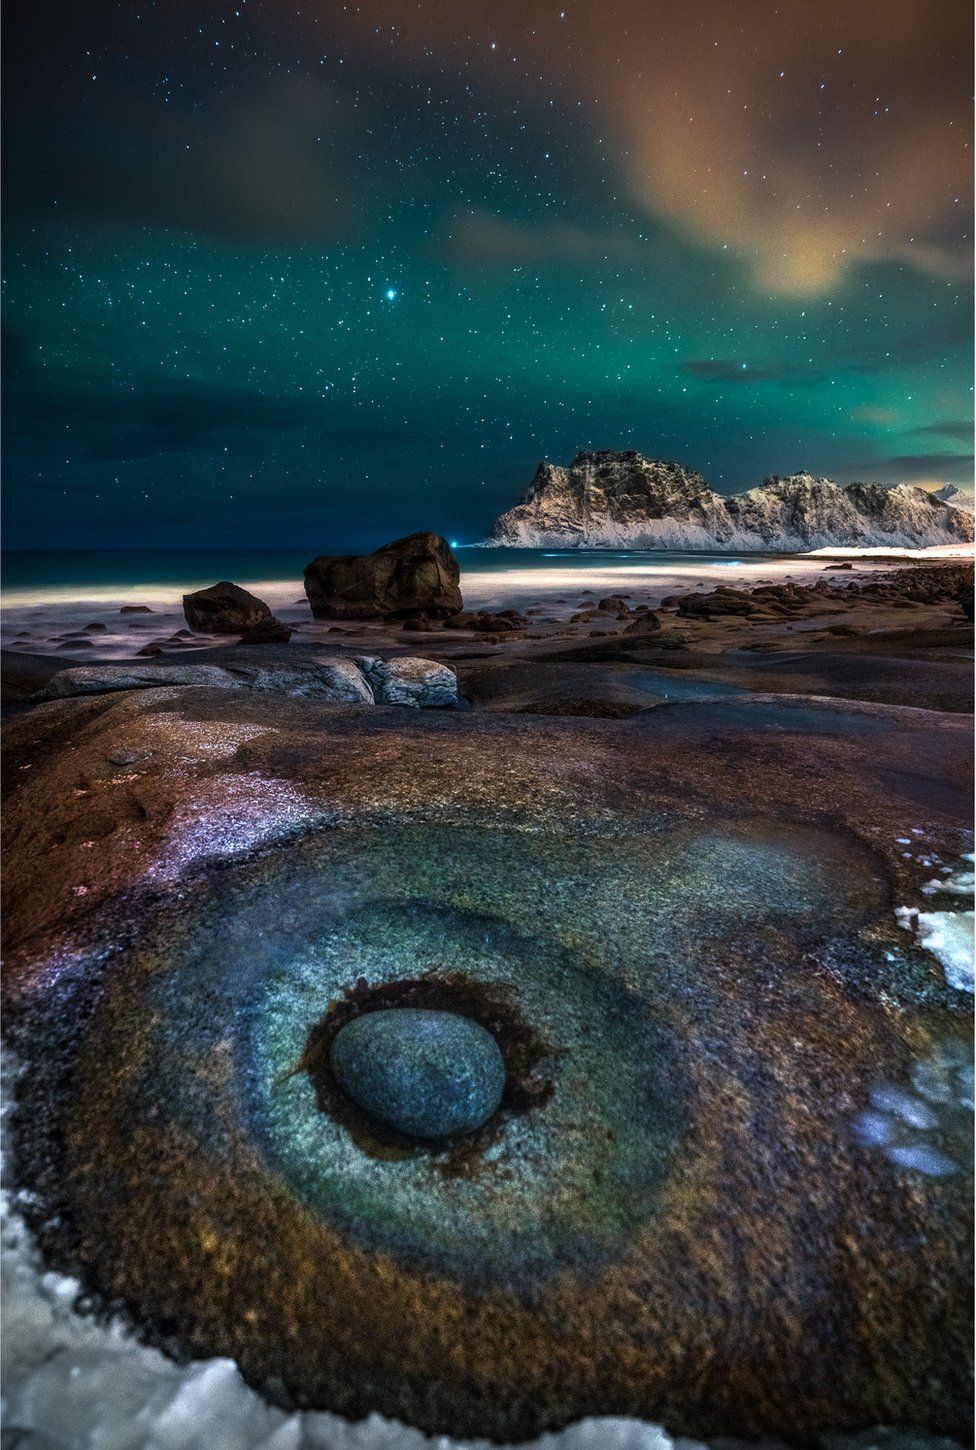 A beach at night with a star-filled sky above